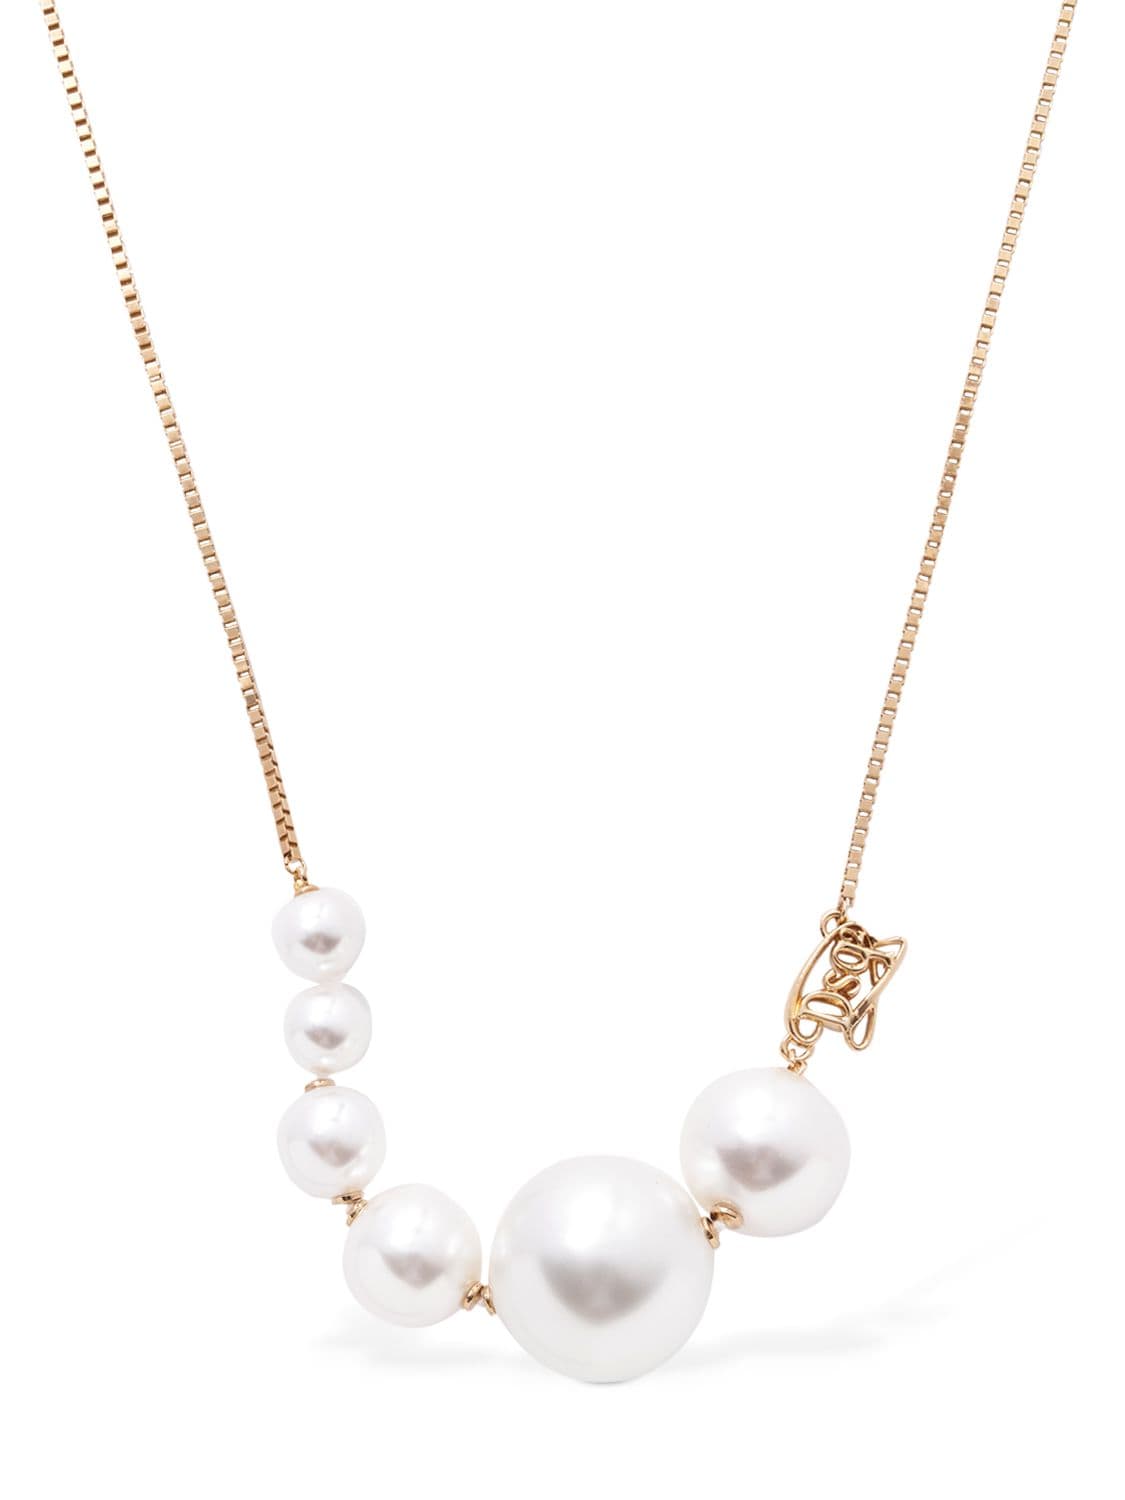 Image of Dsq2 Faux Pearl Charm Necklace